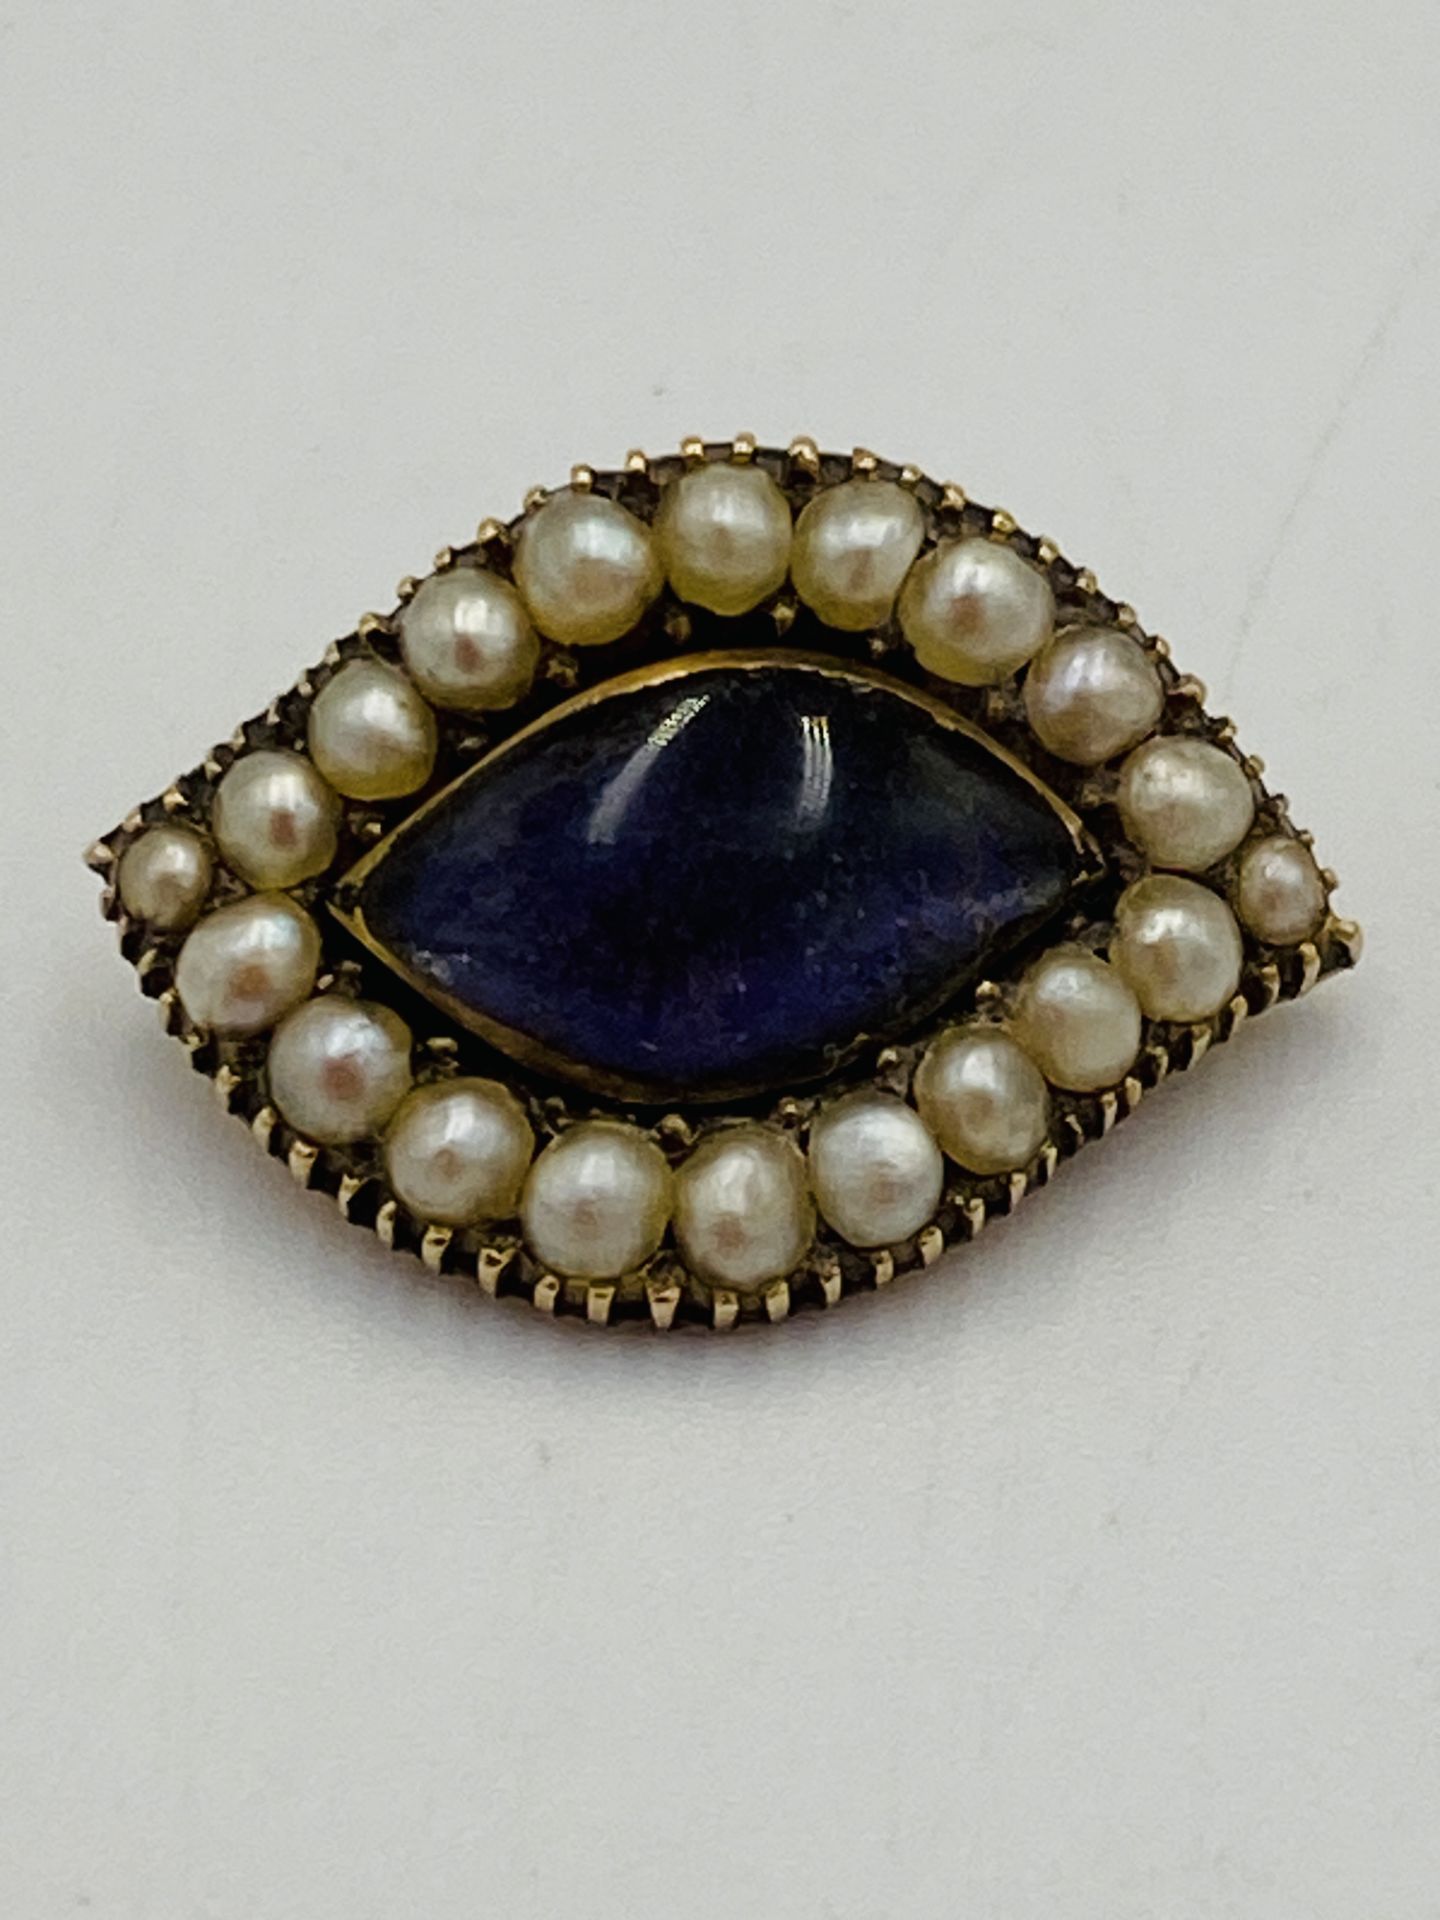 Pearl brooch with purple centre stone - Image 5 of 5